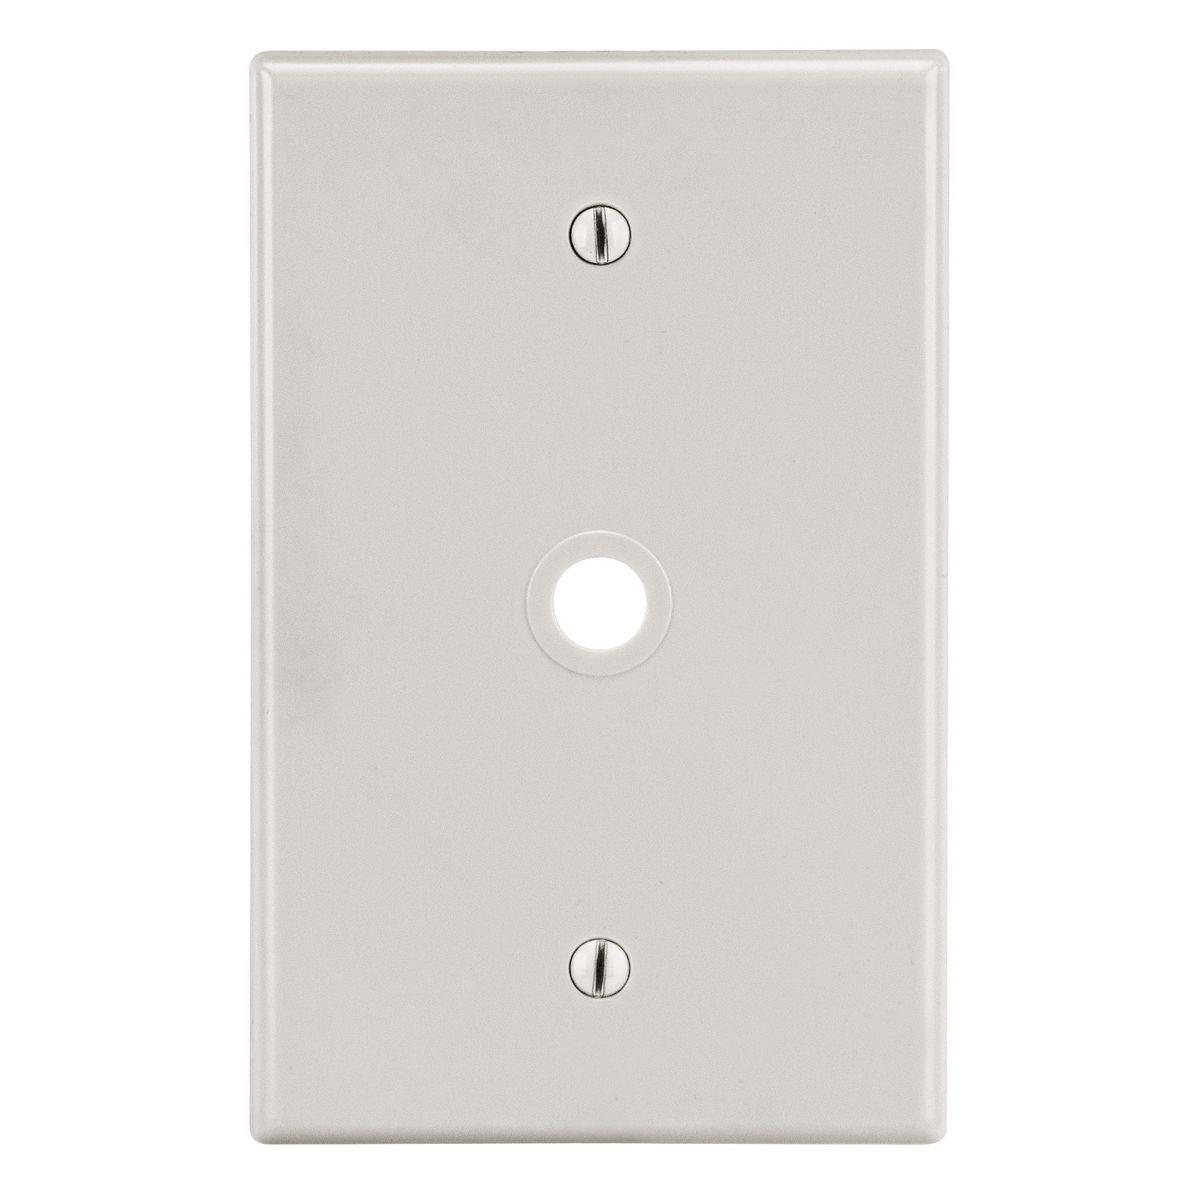 Hubbell PJ11LA Wallplate, Mid-Size 1-Gang, .406" Opening, Box Mount, Light Almond  ; High-impact, self-extinguishing polycarbonate material ; More Rigid ; Sharp lines and less dimpling ; Smooth satin finish ; Blends into wall with an optimum finish ; Smooth Satin Finish